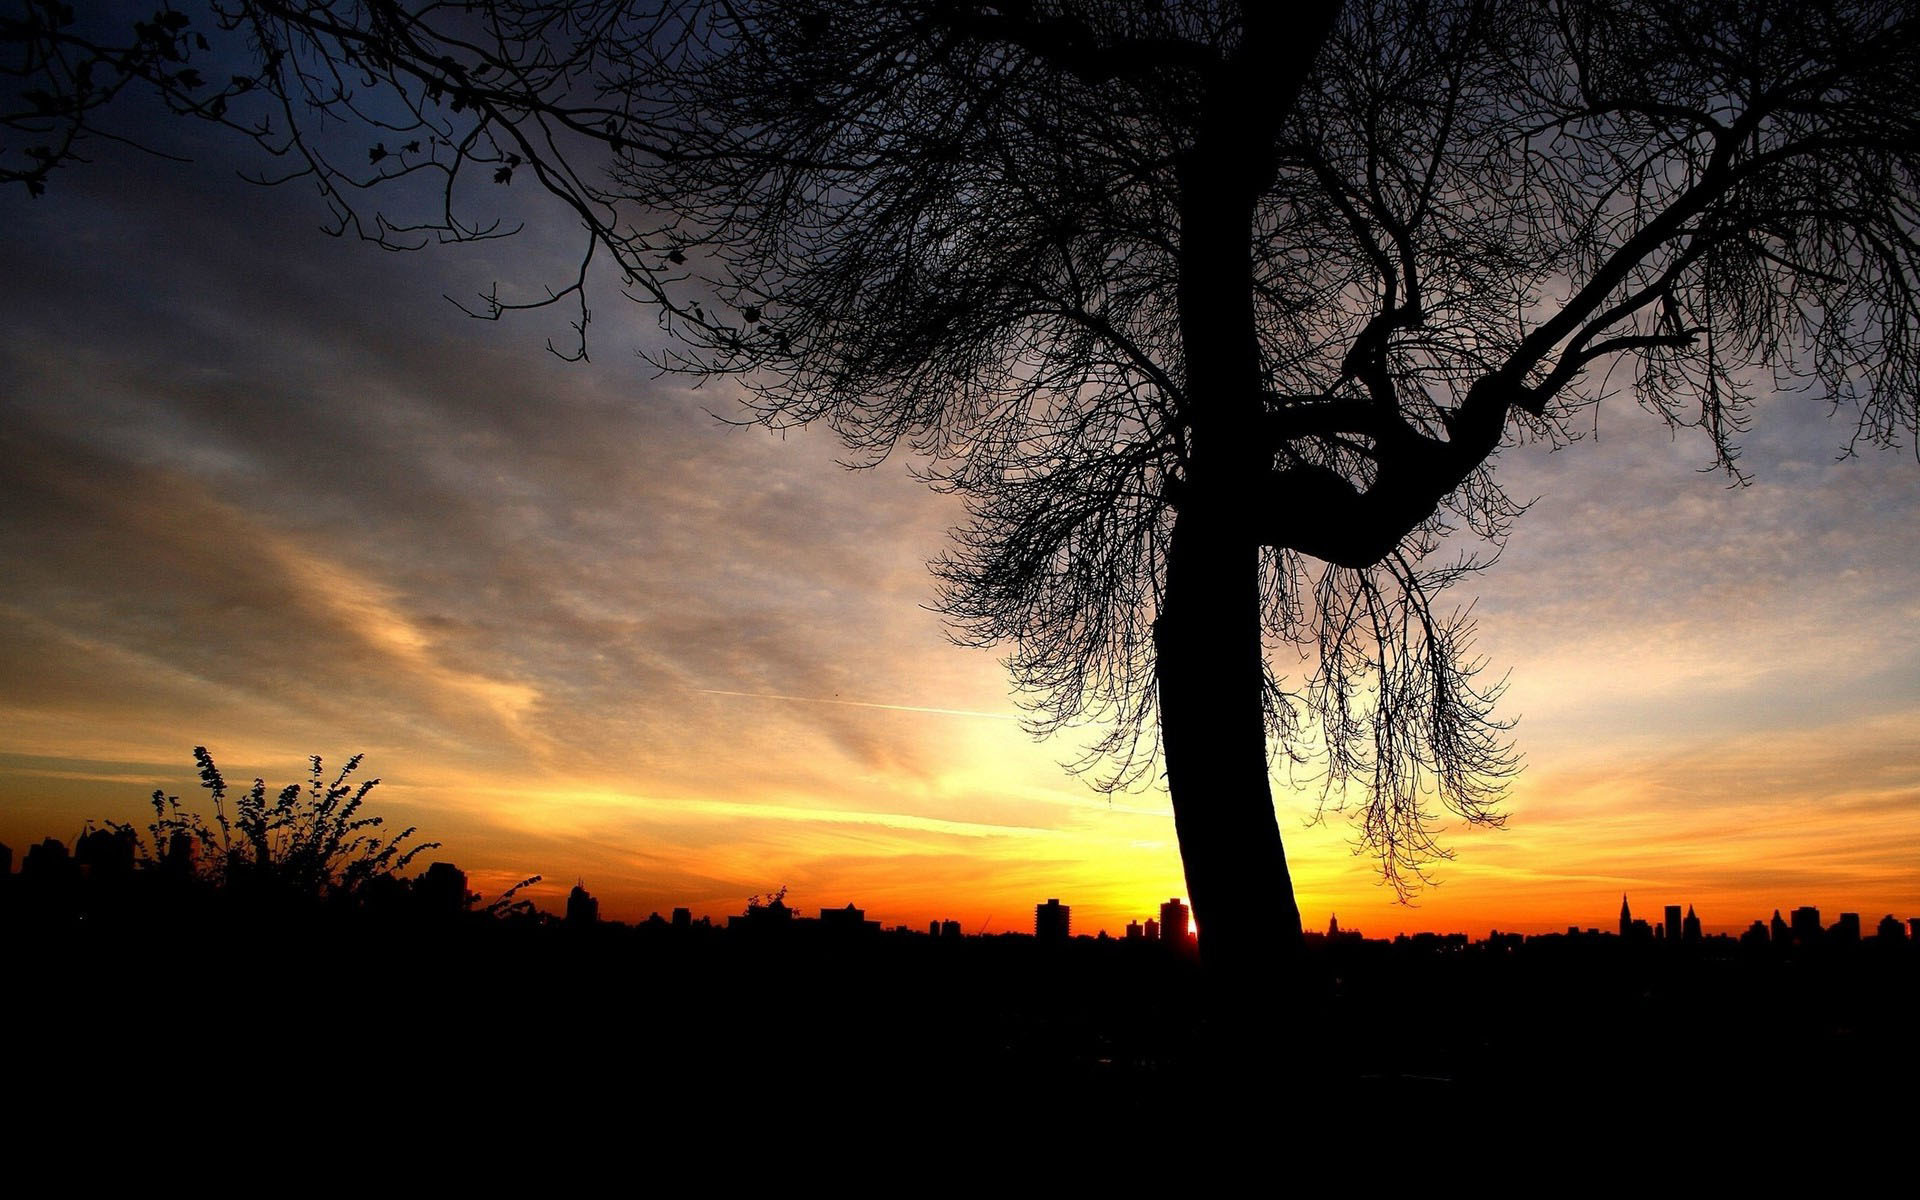 Tree silhouette in the evening sky wallpaper 12688